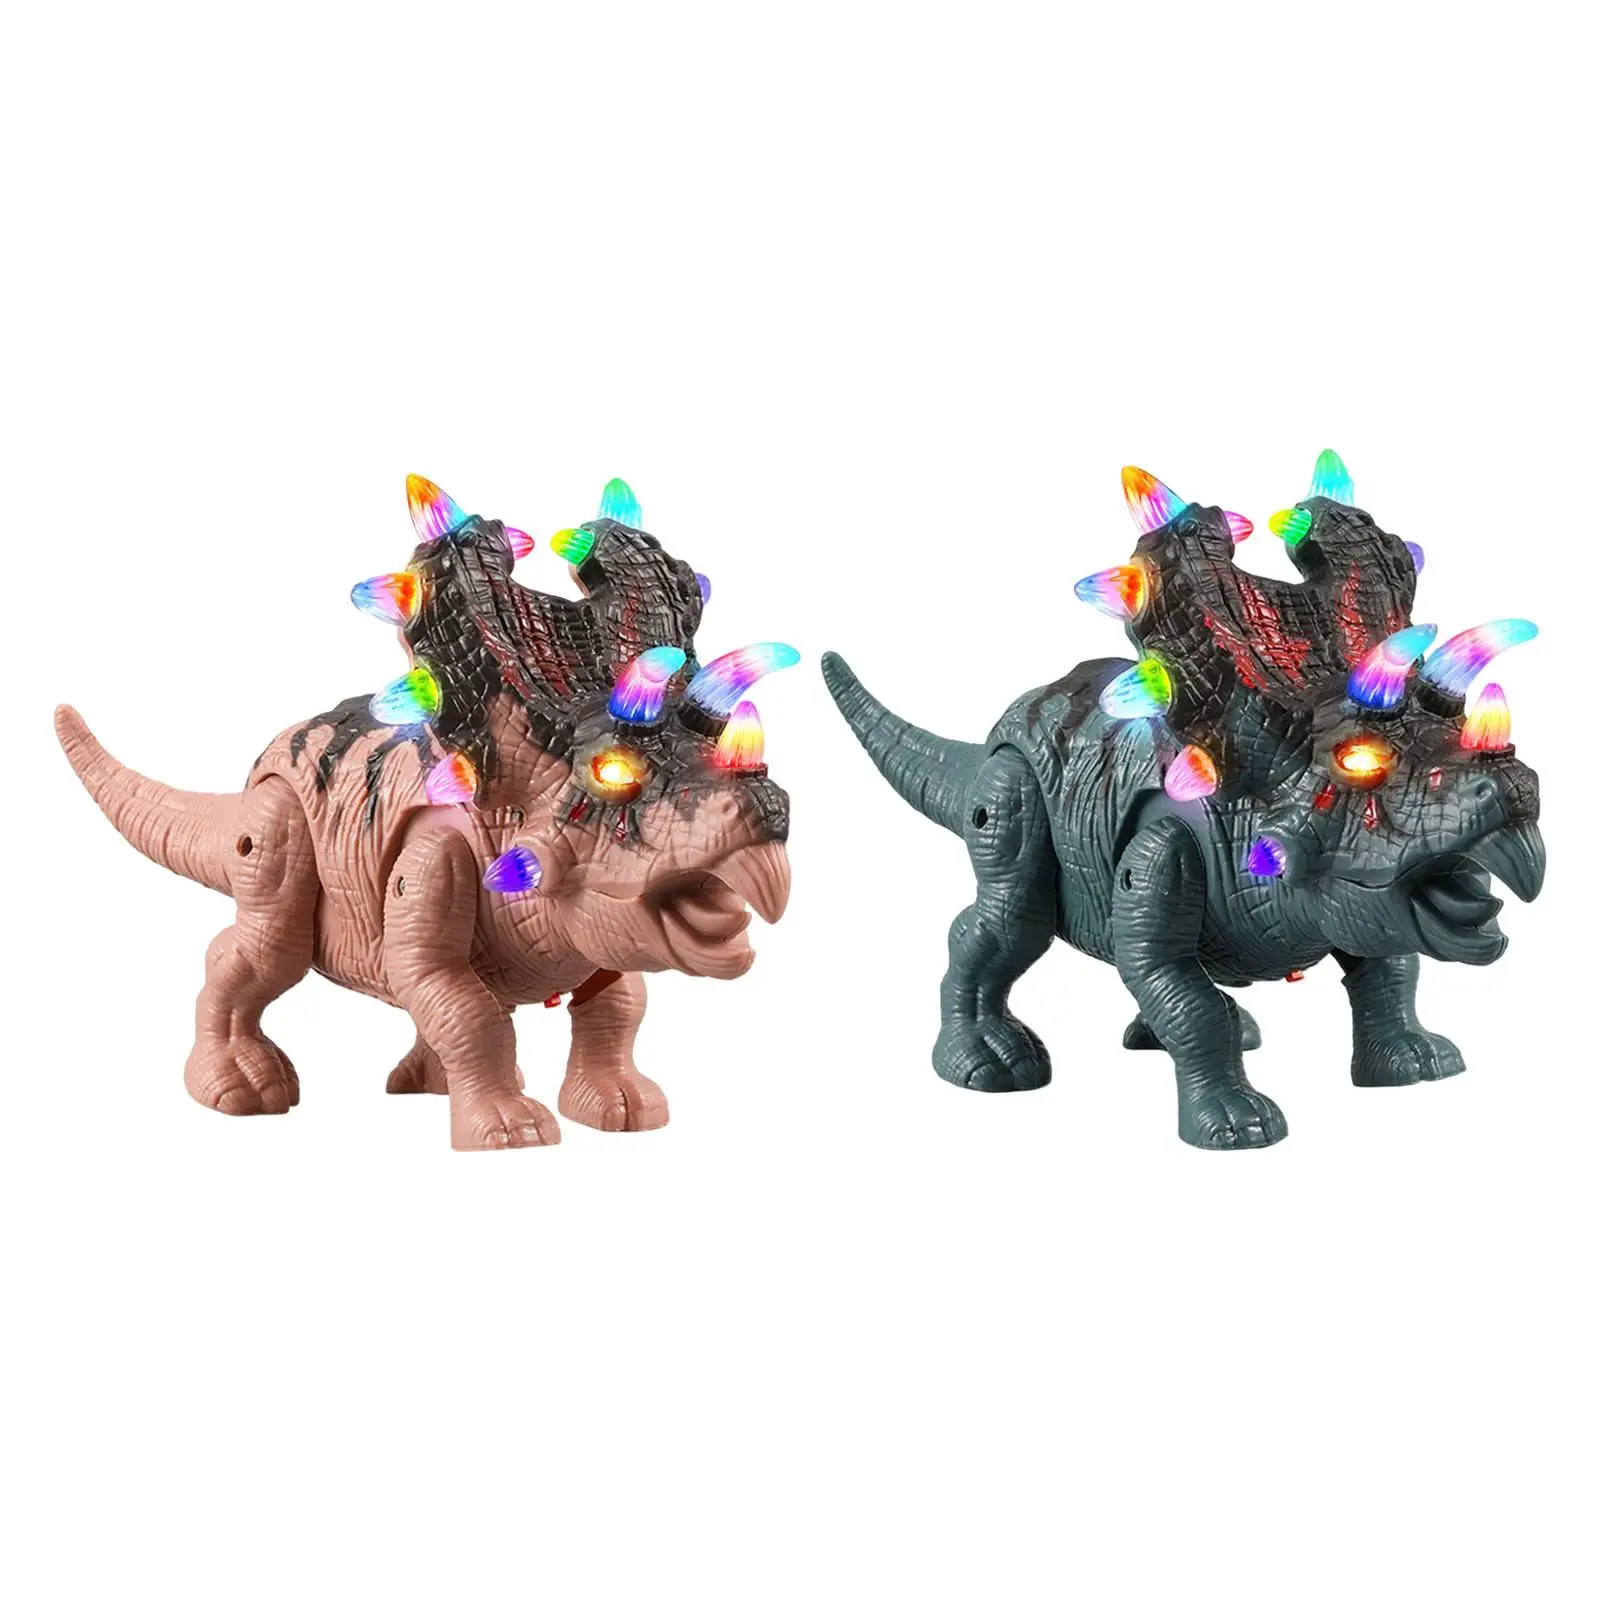 Simulation Walking Robot Dinosaur Action Figure with Sounds for Girls Boys Kids Holiday Present